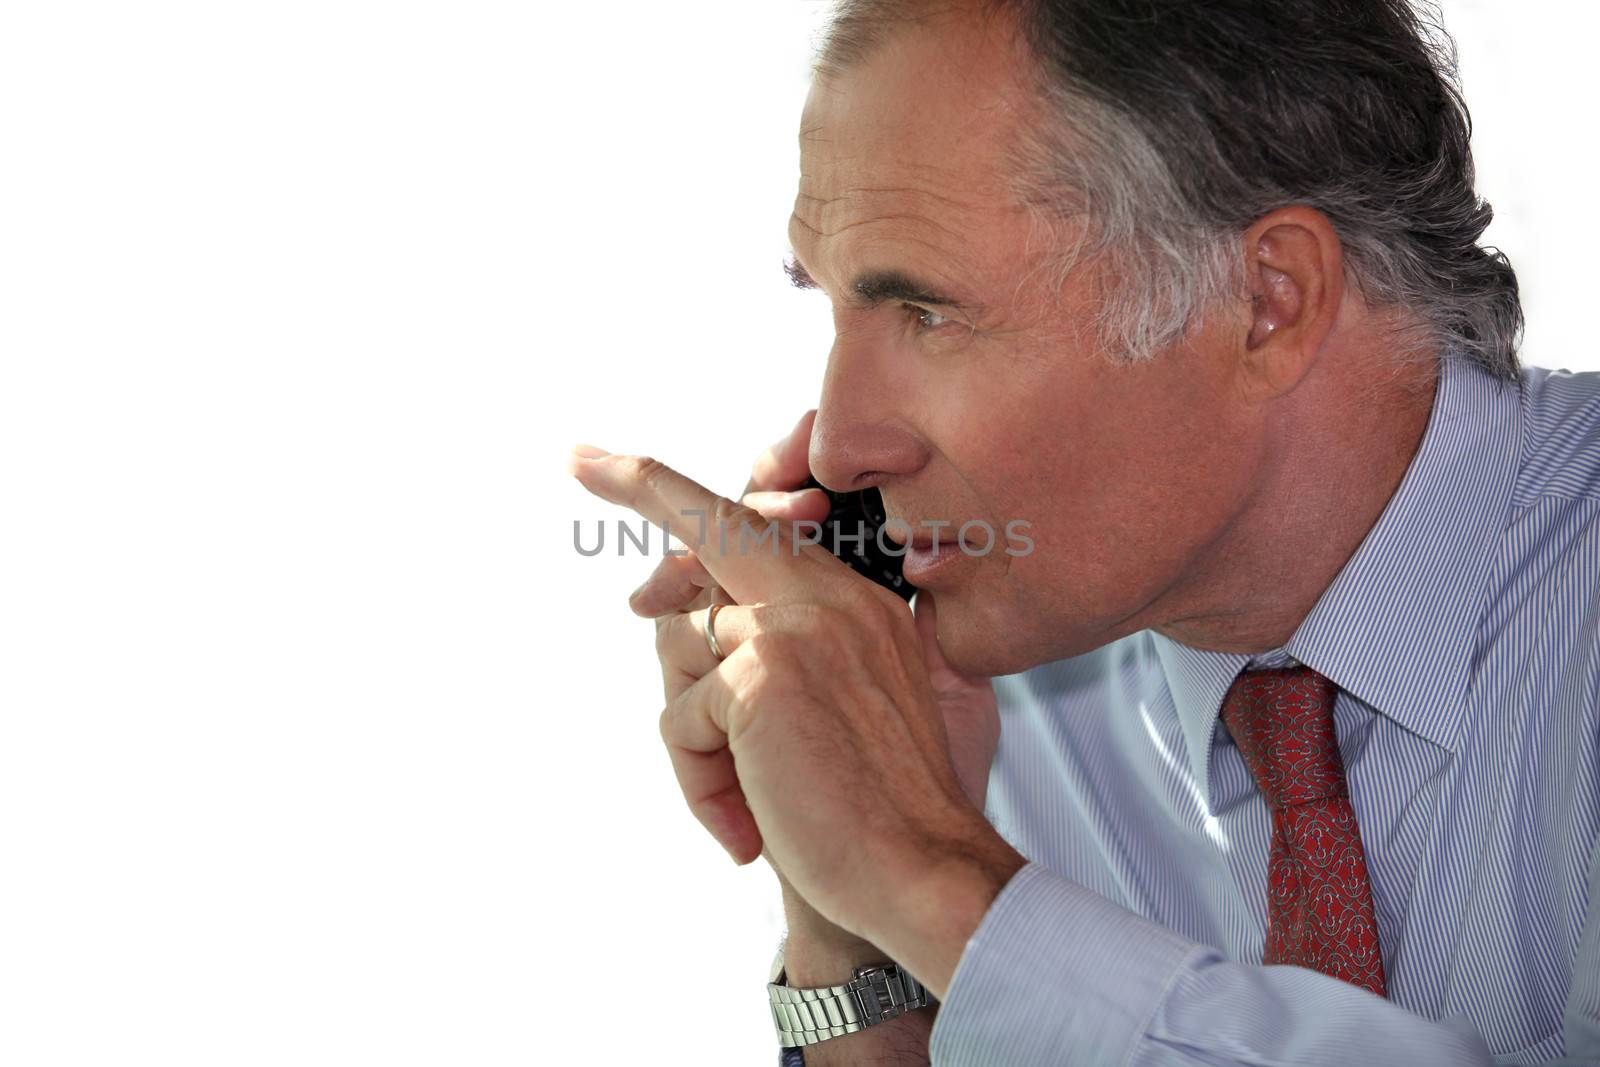 Businessman making hand gestures while talking on his mobile phone